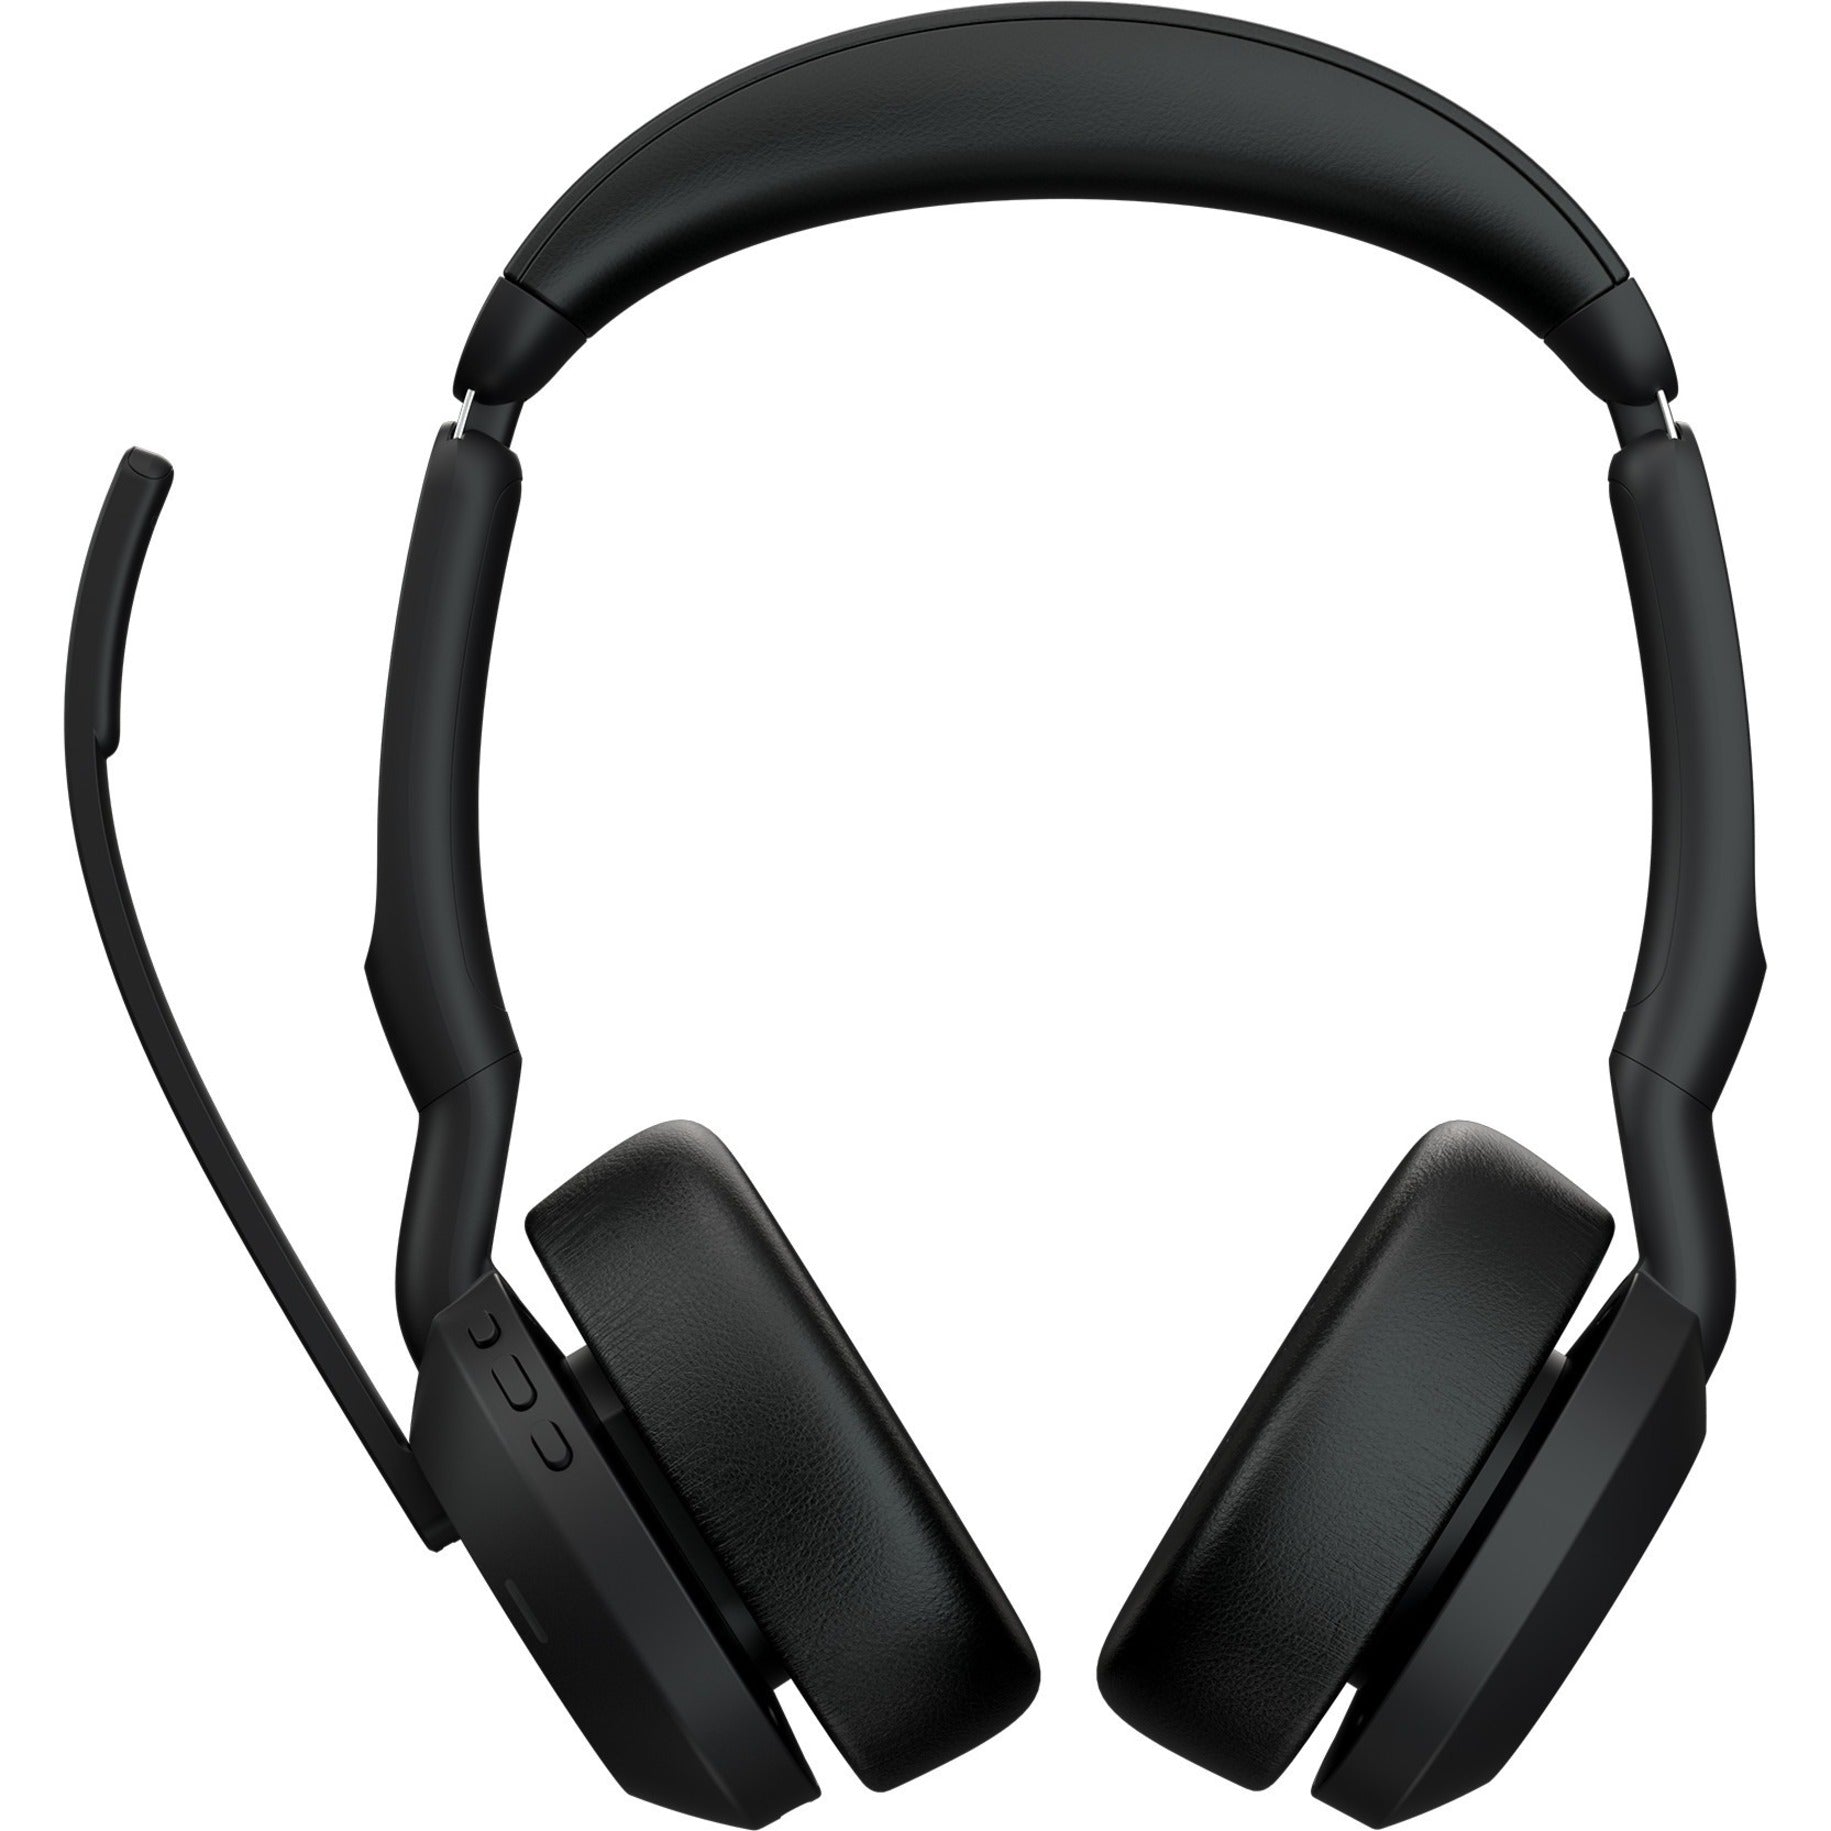 Jabra 25599-989-889-01 Evolve2 55 Headset, Wireless Bluetooth Stereo Headset with Boom Microphone, Noise Cancelling, 2 Year Warranty